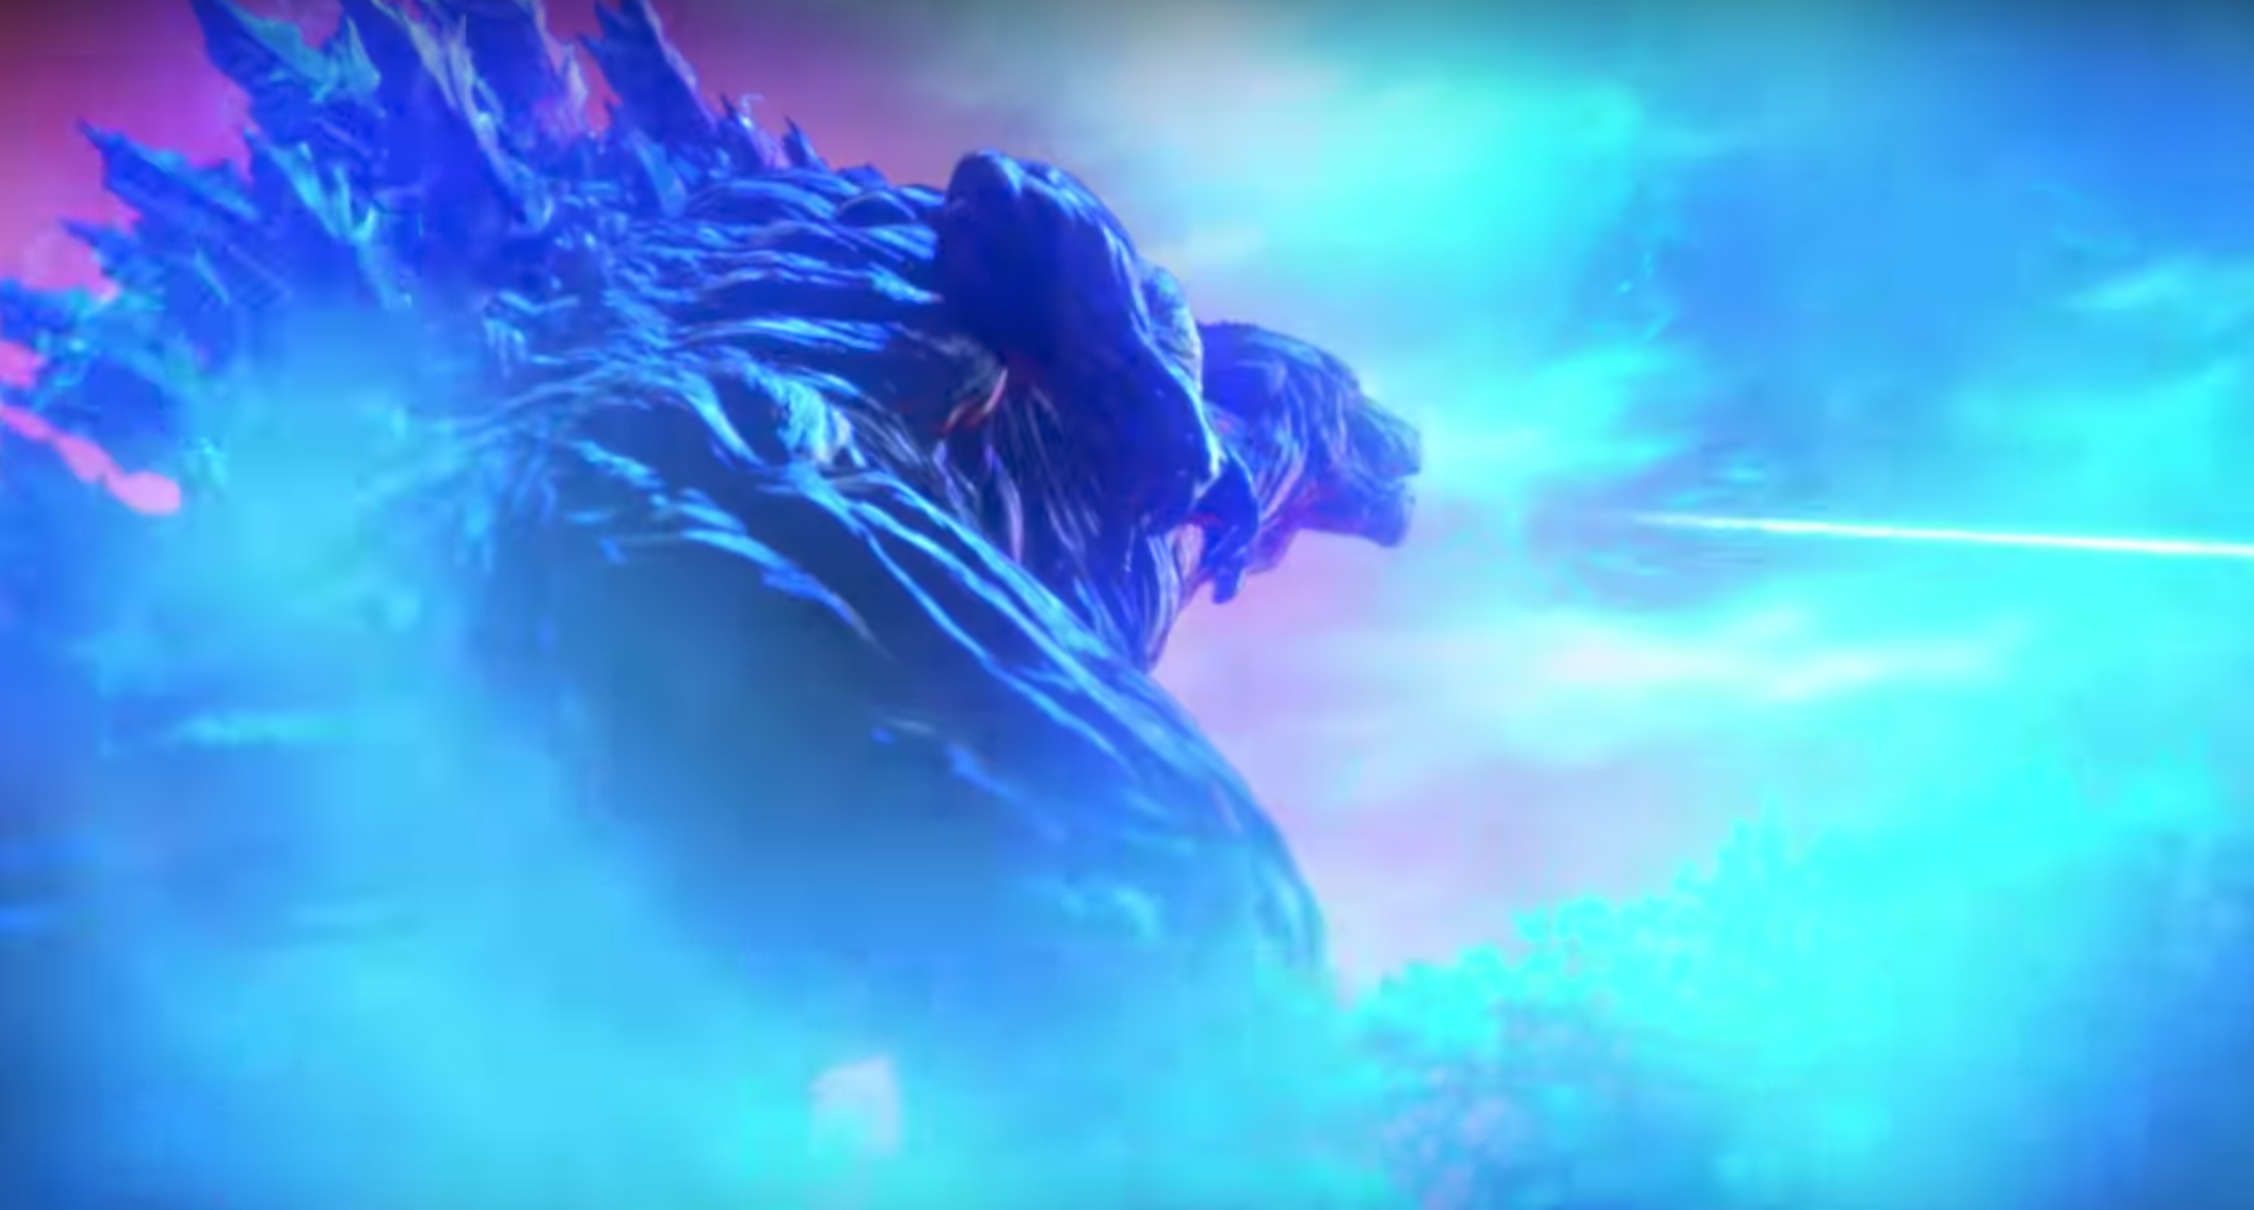 Head to Godzilla: Monster Planet in latest trailer for anime monster flick